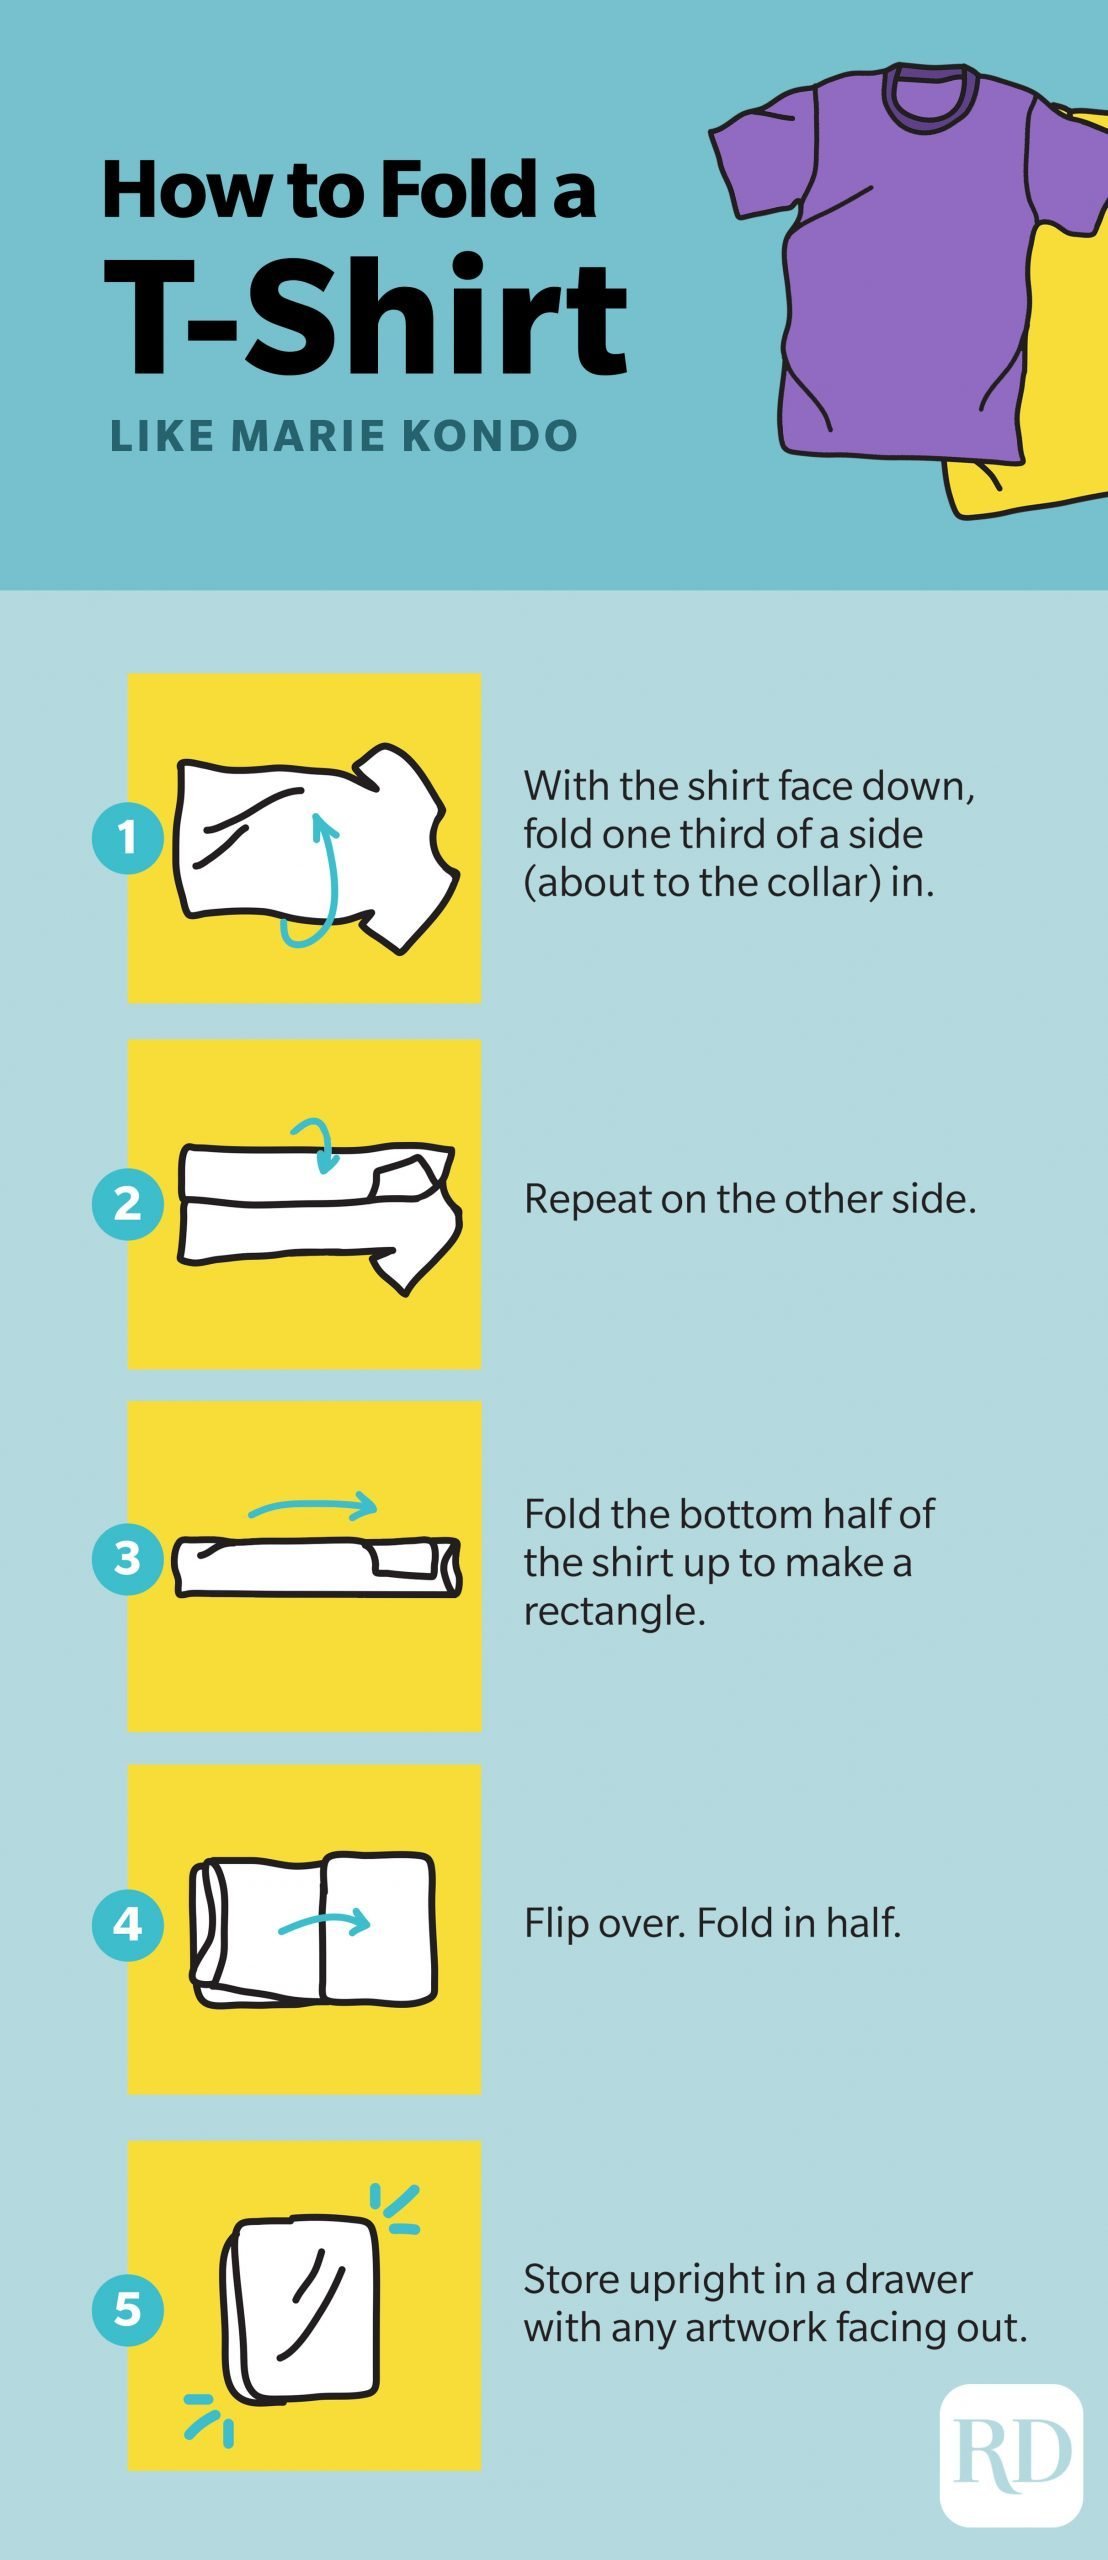 Folding underpants: Tips for more order in the closet